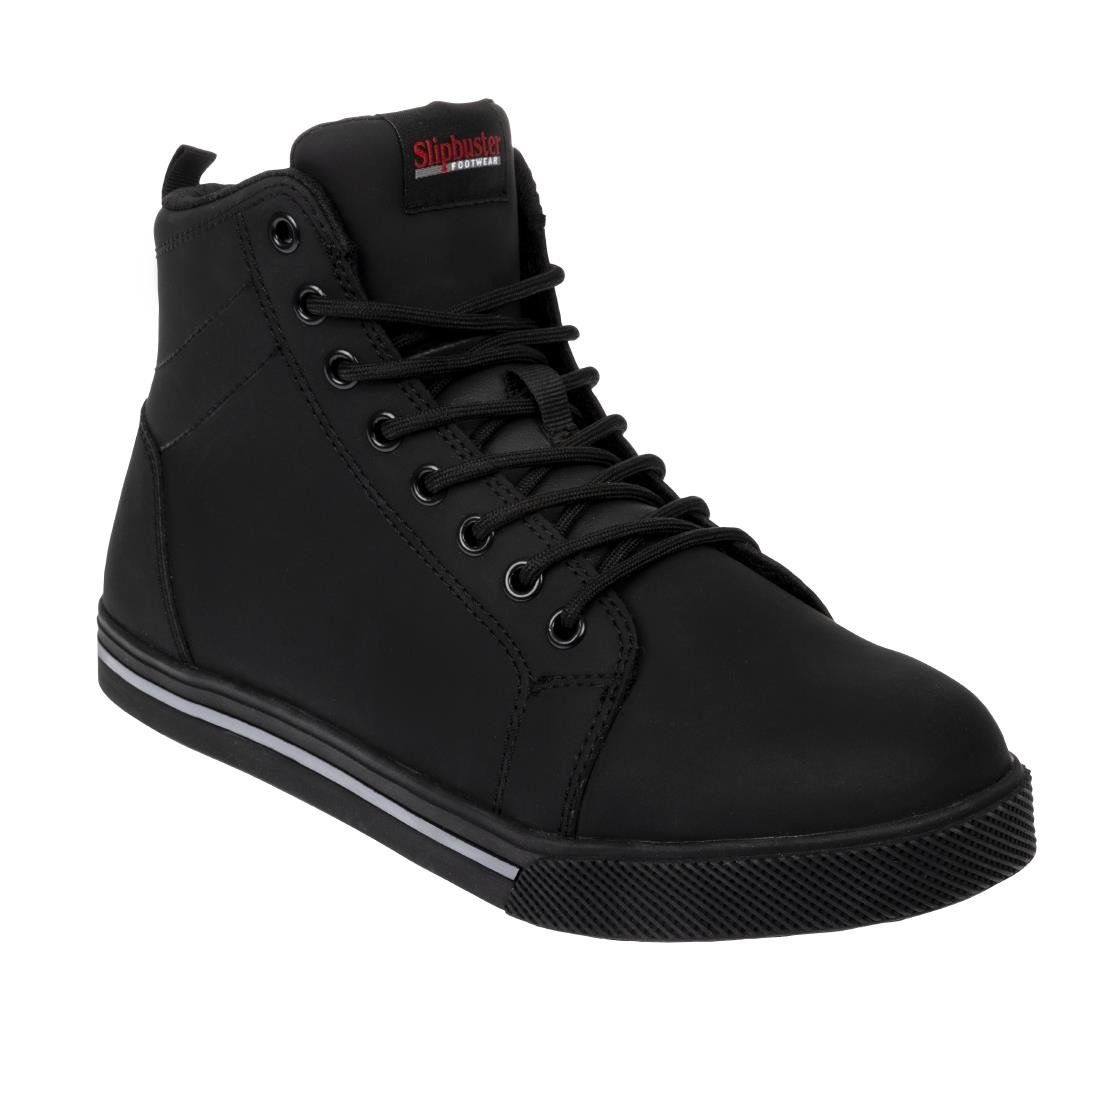 BA061-43 Slipbuster Recycled Microfibre Safety Hi Top Boots Matte Black 43 JD Catering Equipment Solutions Ltd